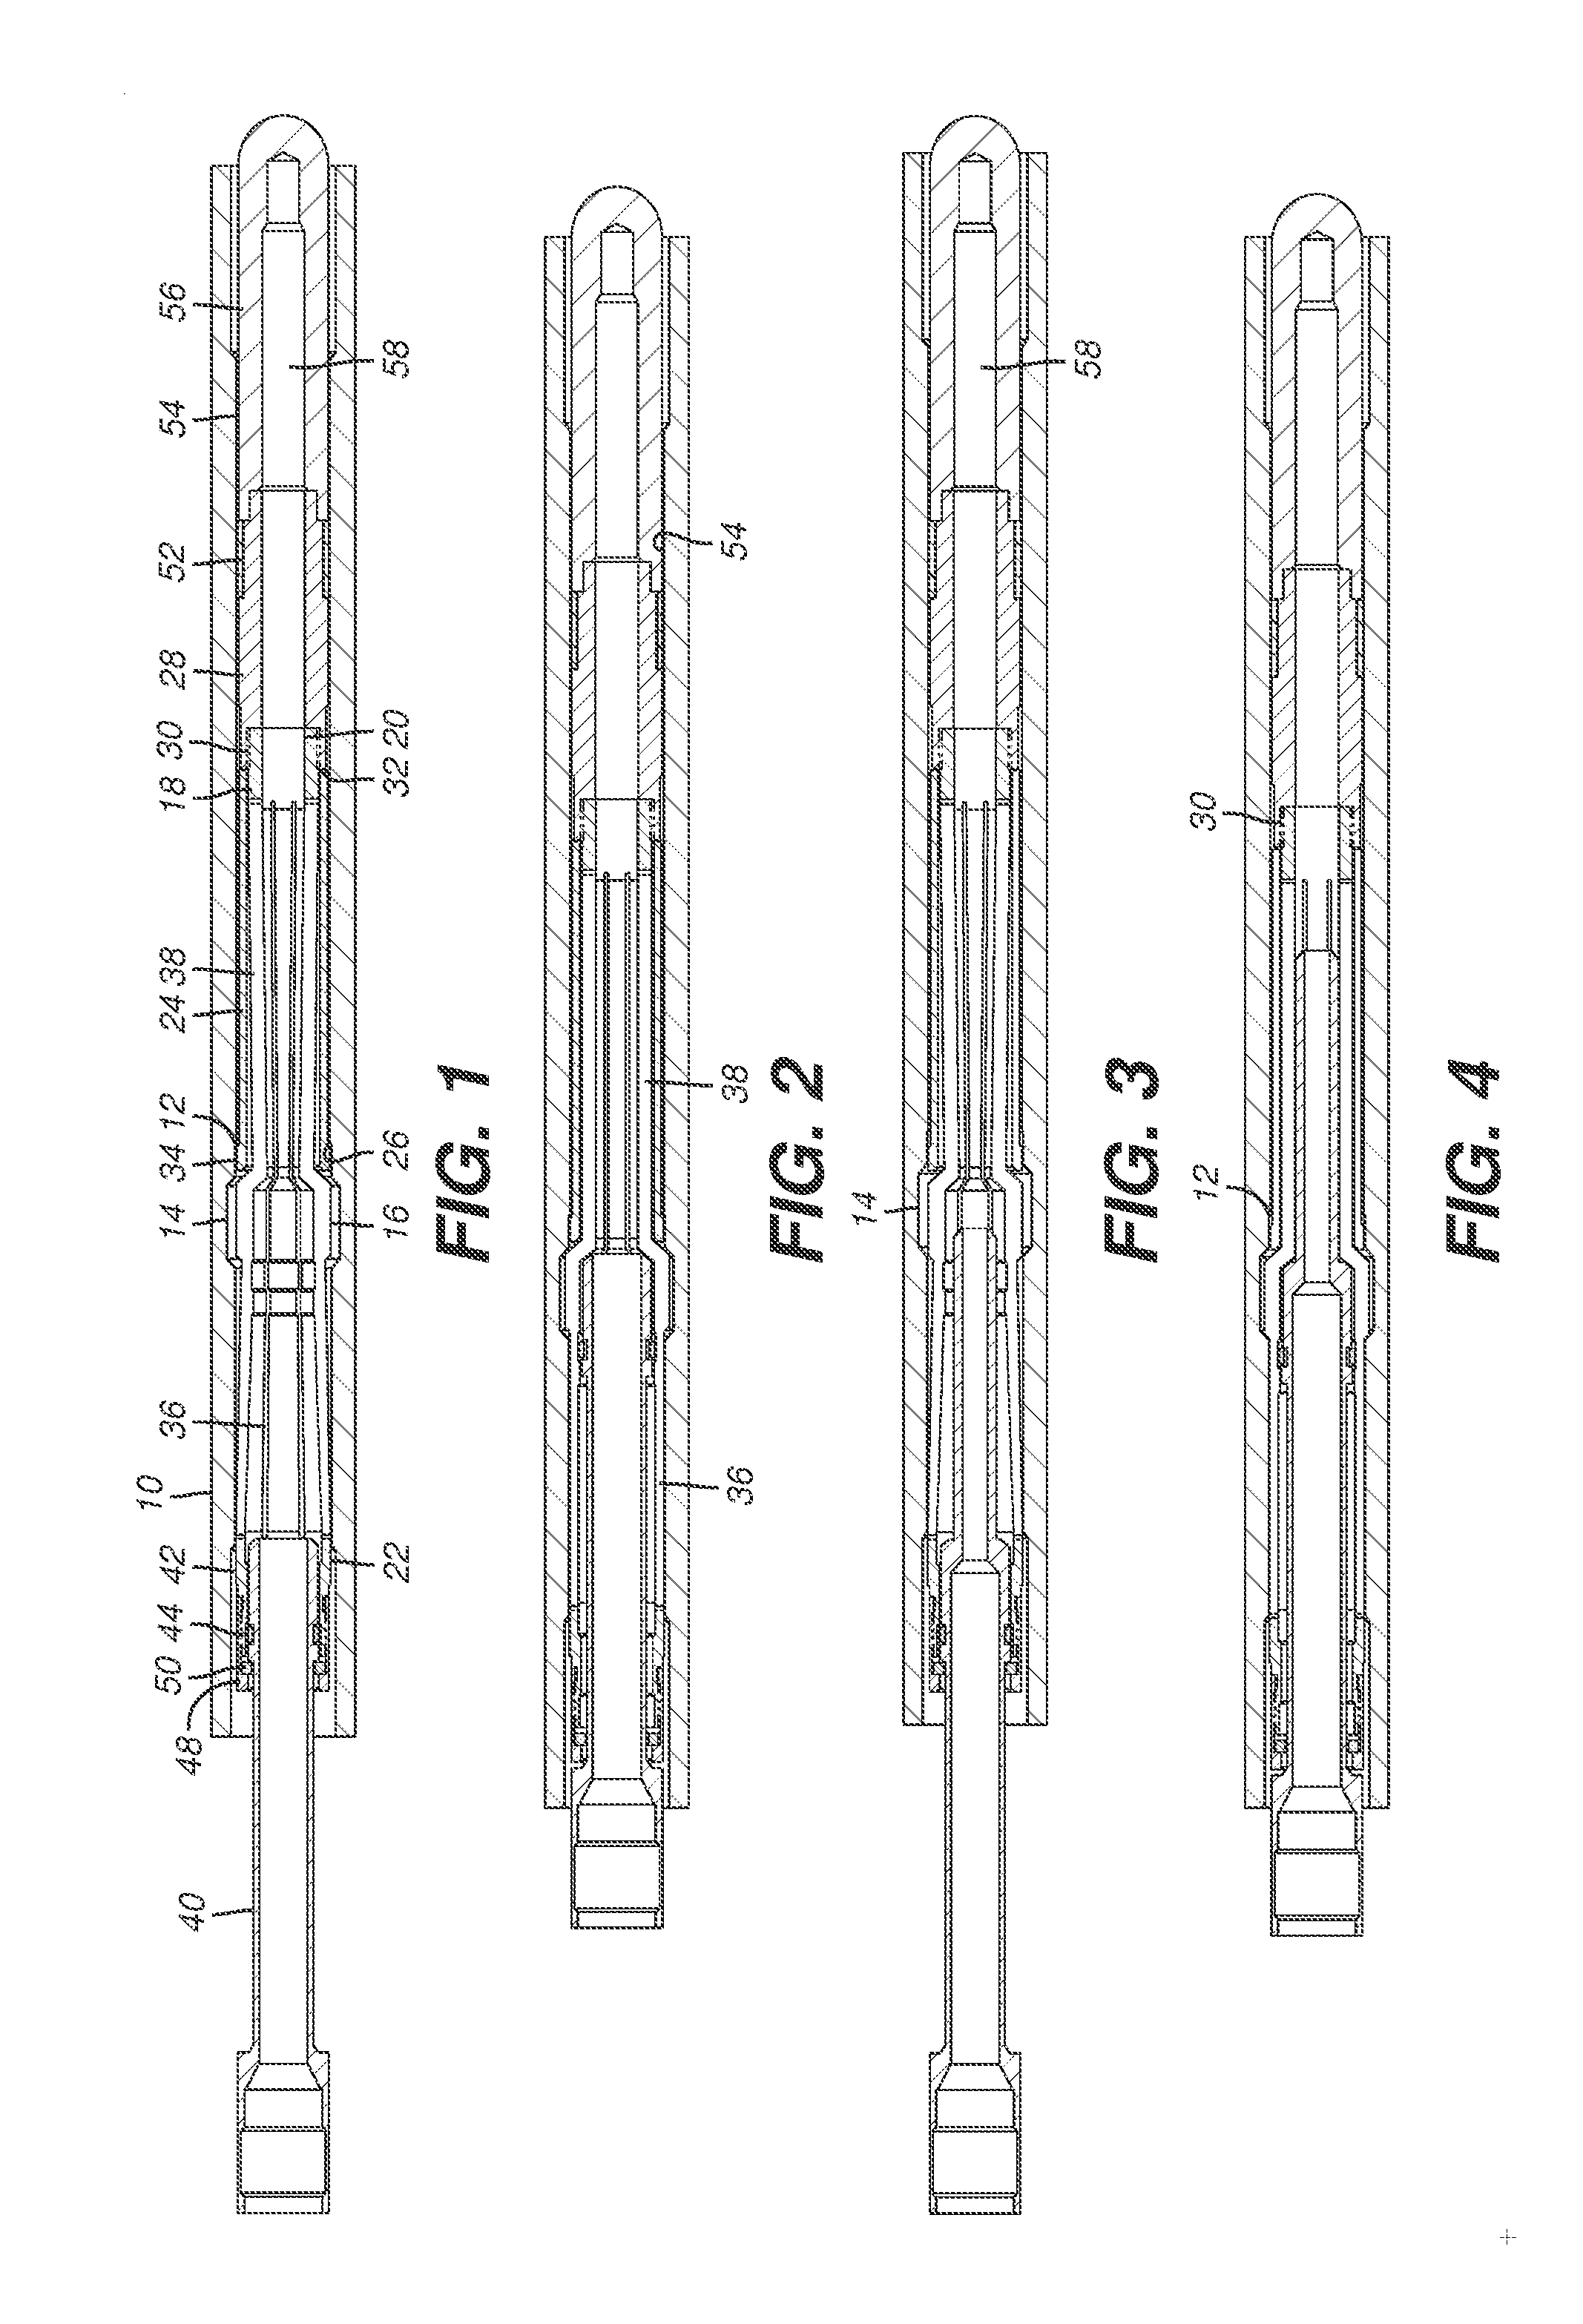 Flexible Collet Anchor Assembly with Compressive Load Transfer Feature